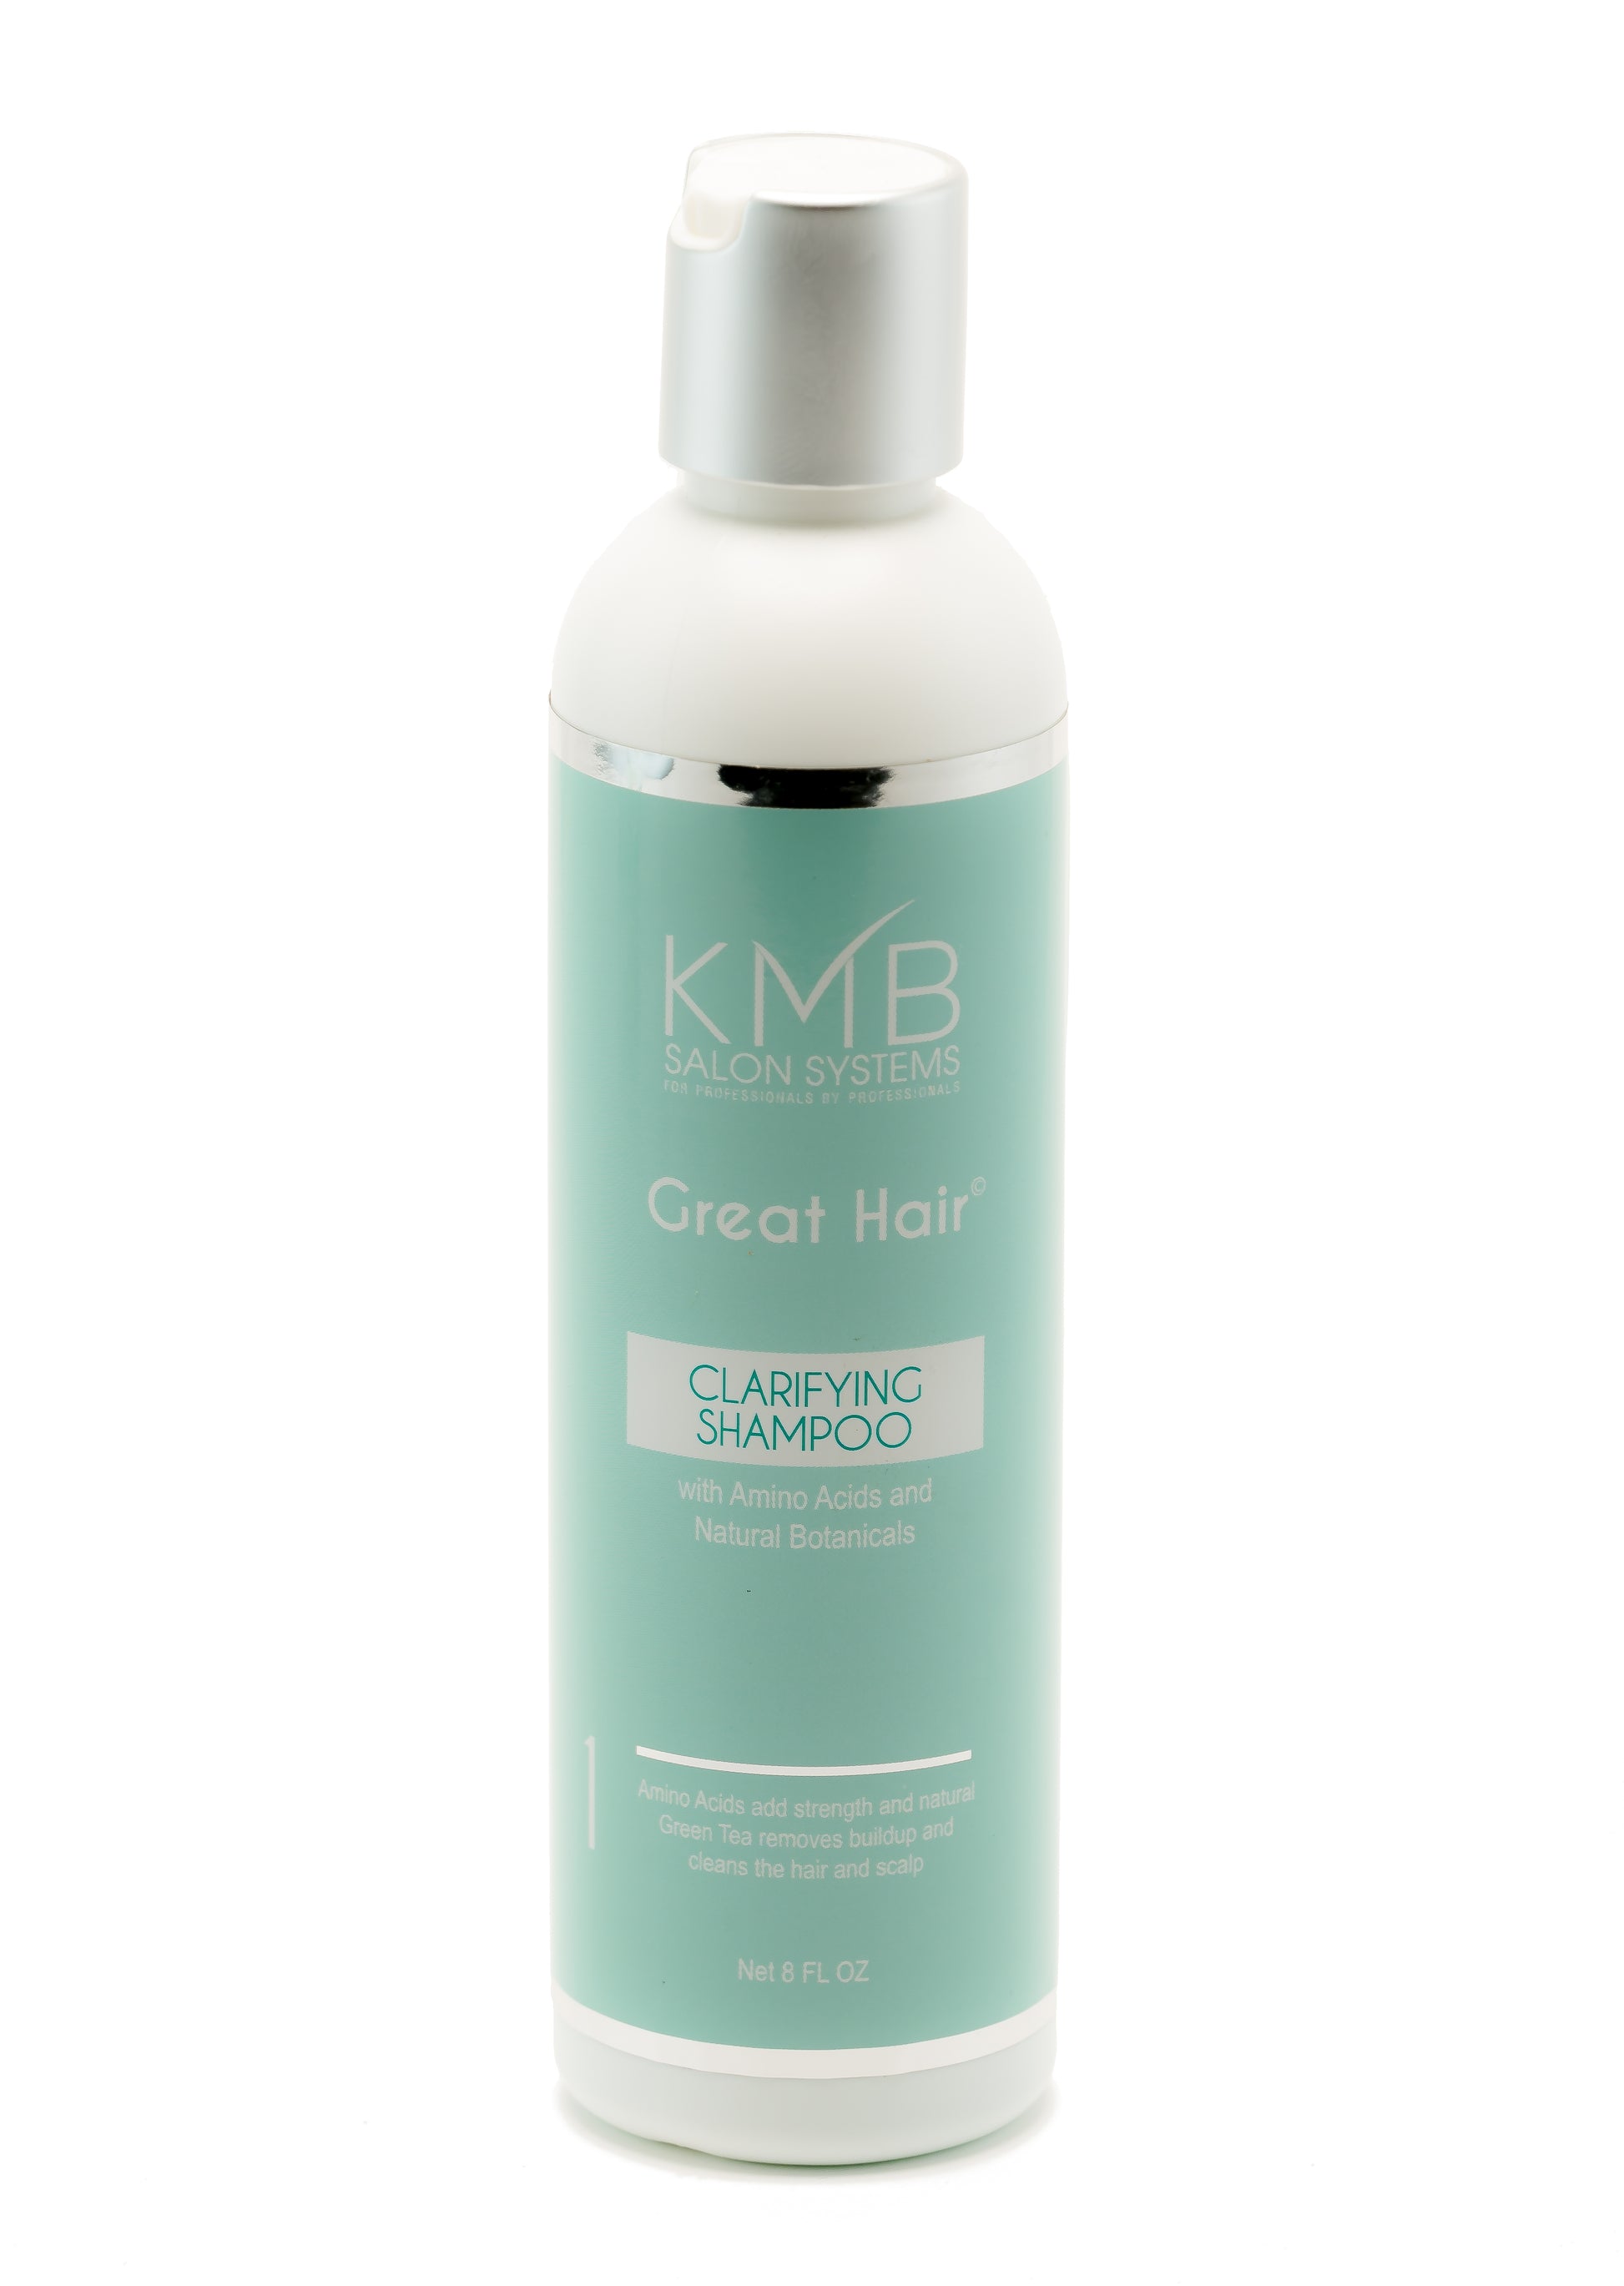 KMB Great Hair Clarifying Shampoo is a hair and scalp cleanser that removes dirt, styling products residue, and mineral deposits from the hair.  It is formulated with green tea extracts.